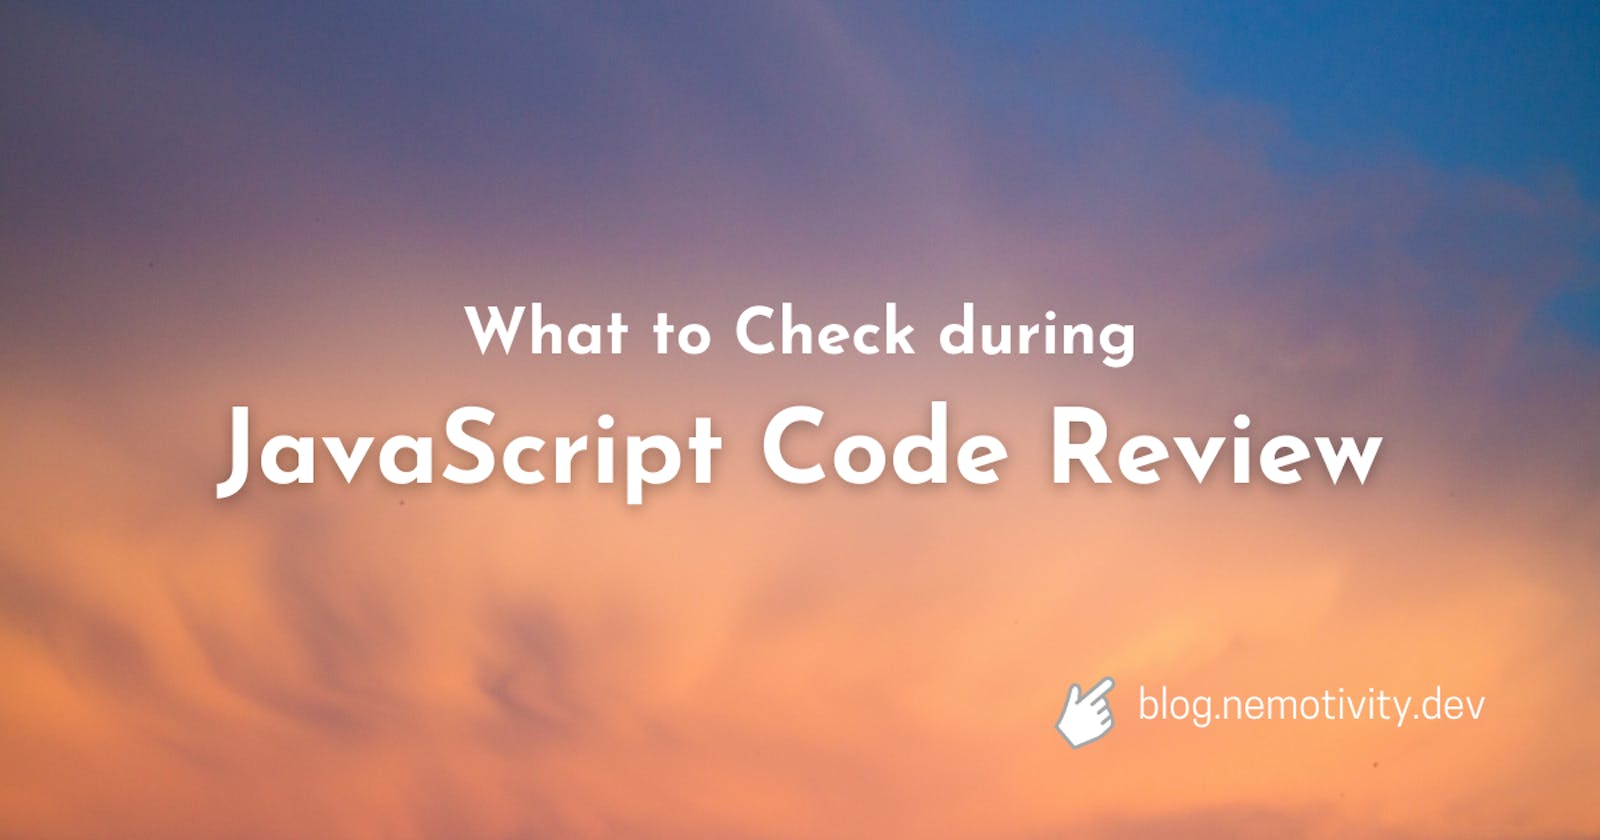 What to Check during JavaScript Code Review